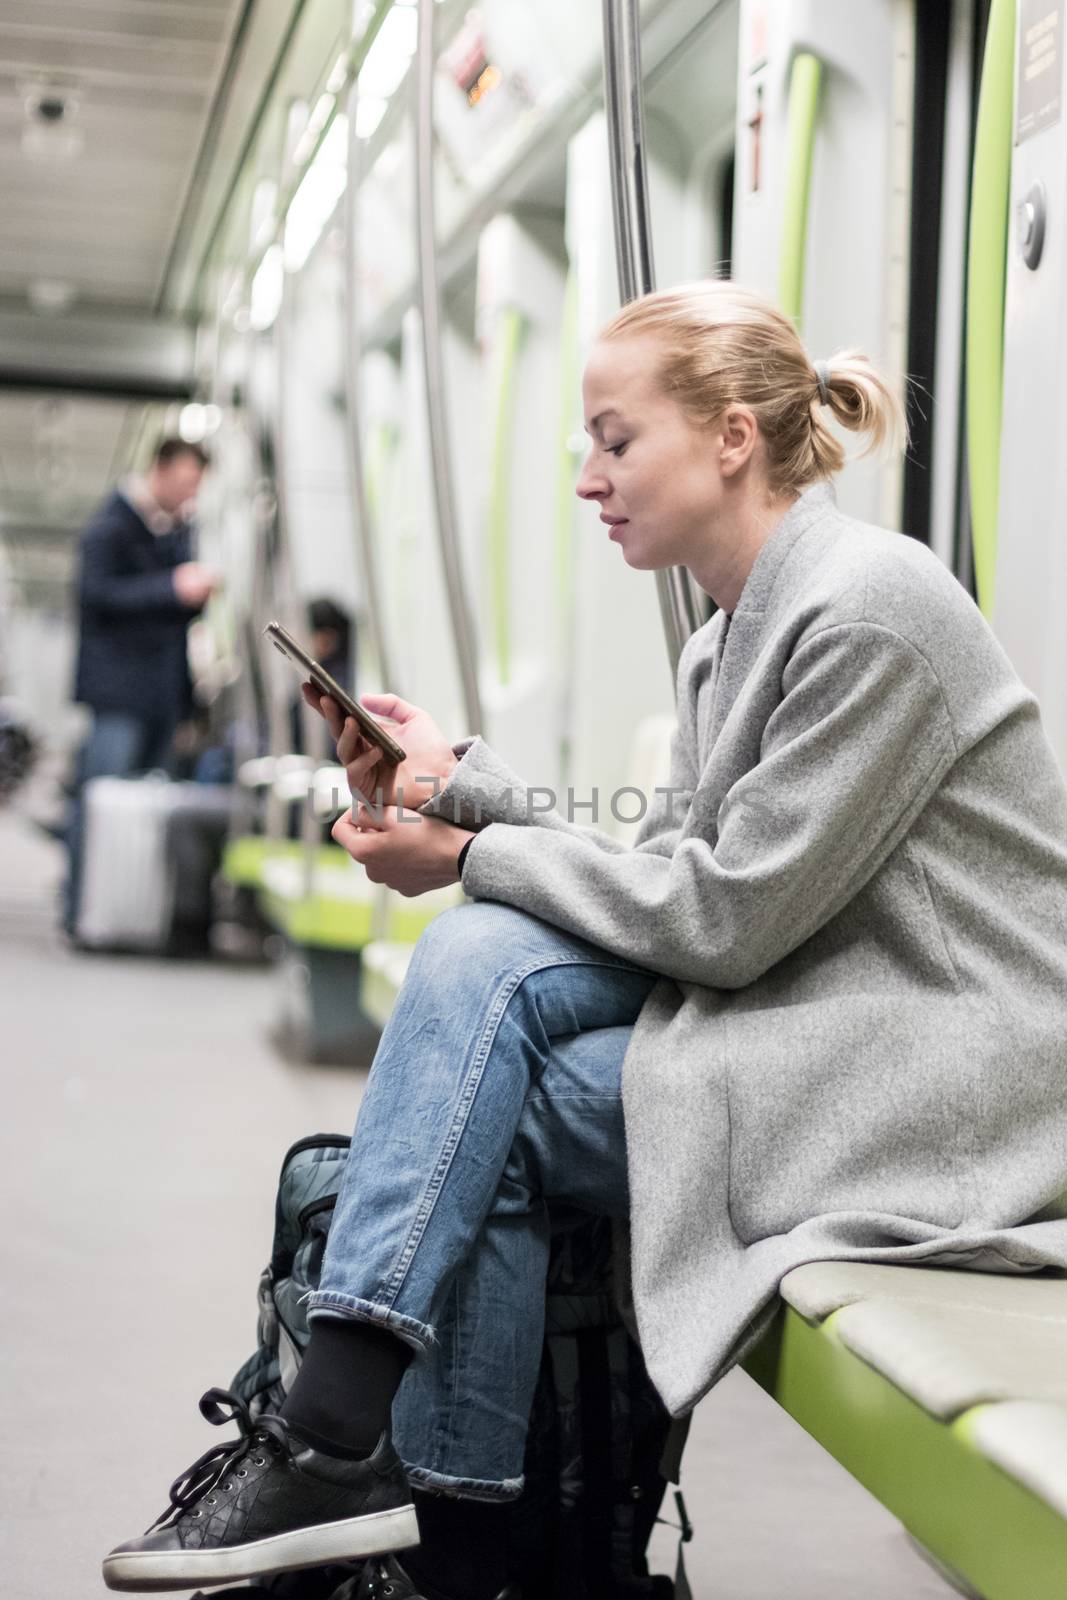 Portrait of lovely girl typing message on mobile phone in almost empty public subway train. Staying at home and social distancing recomented due to corona virus pandemic outbreak.